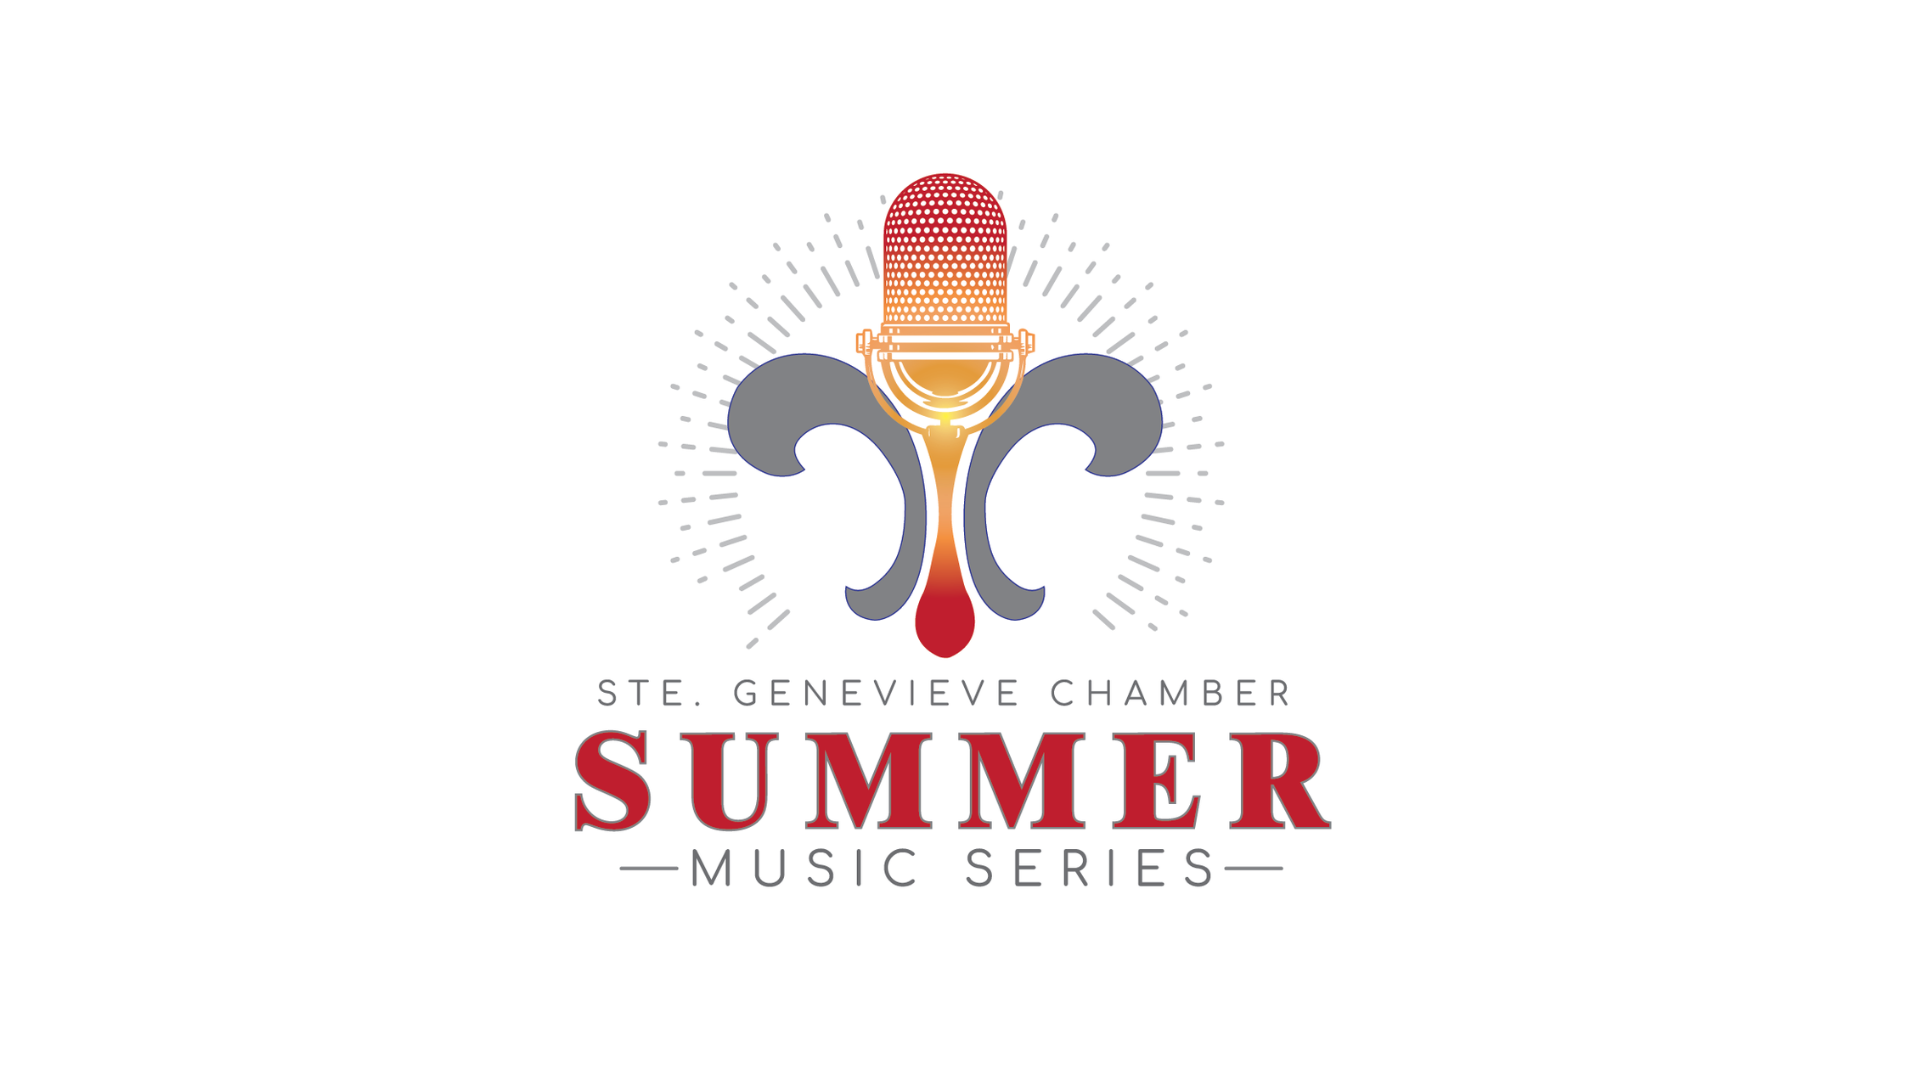 Ste. Genvieve Chamber Summer Concerts